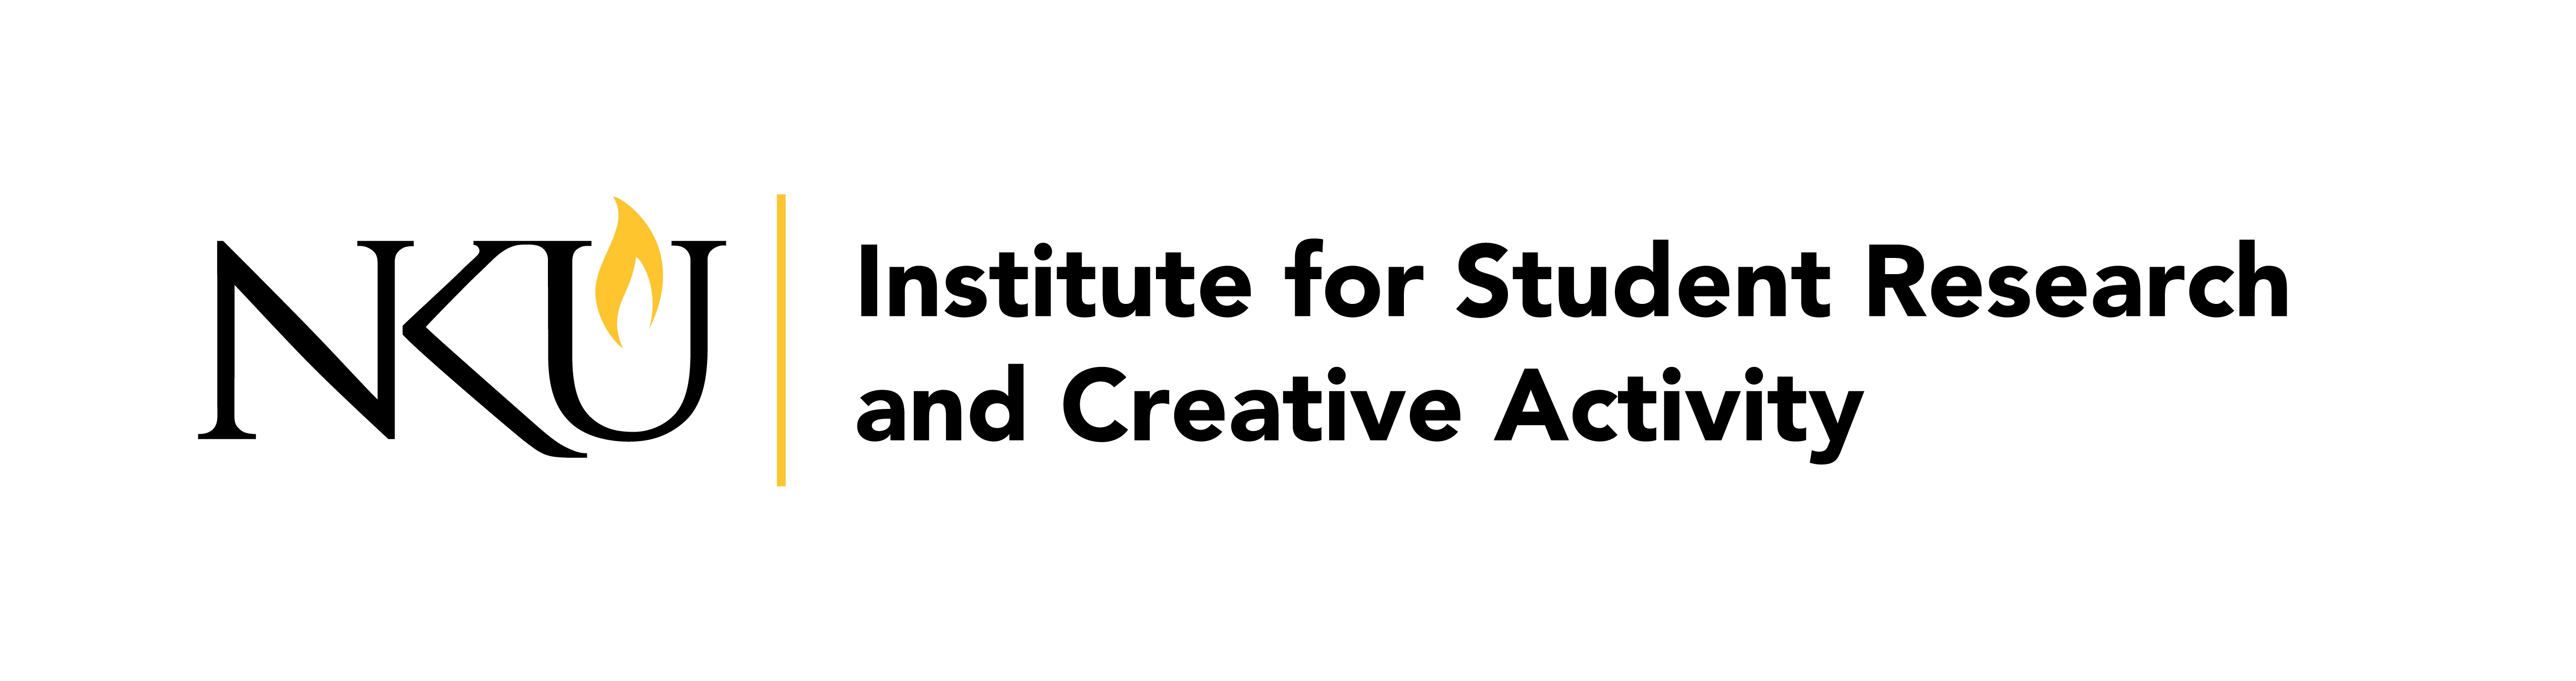 Institute for Student Research and Creative Activity